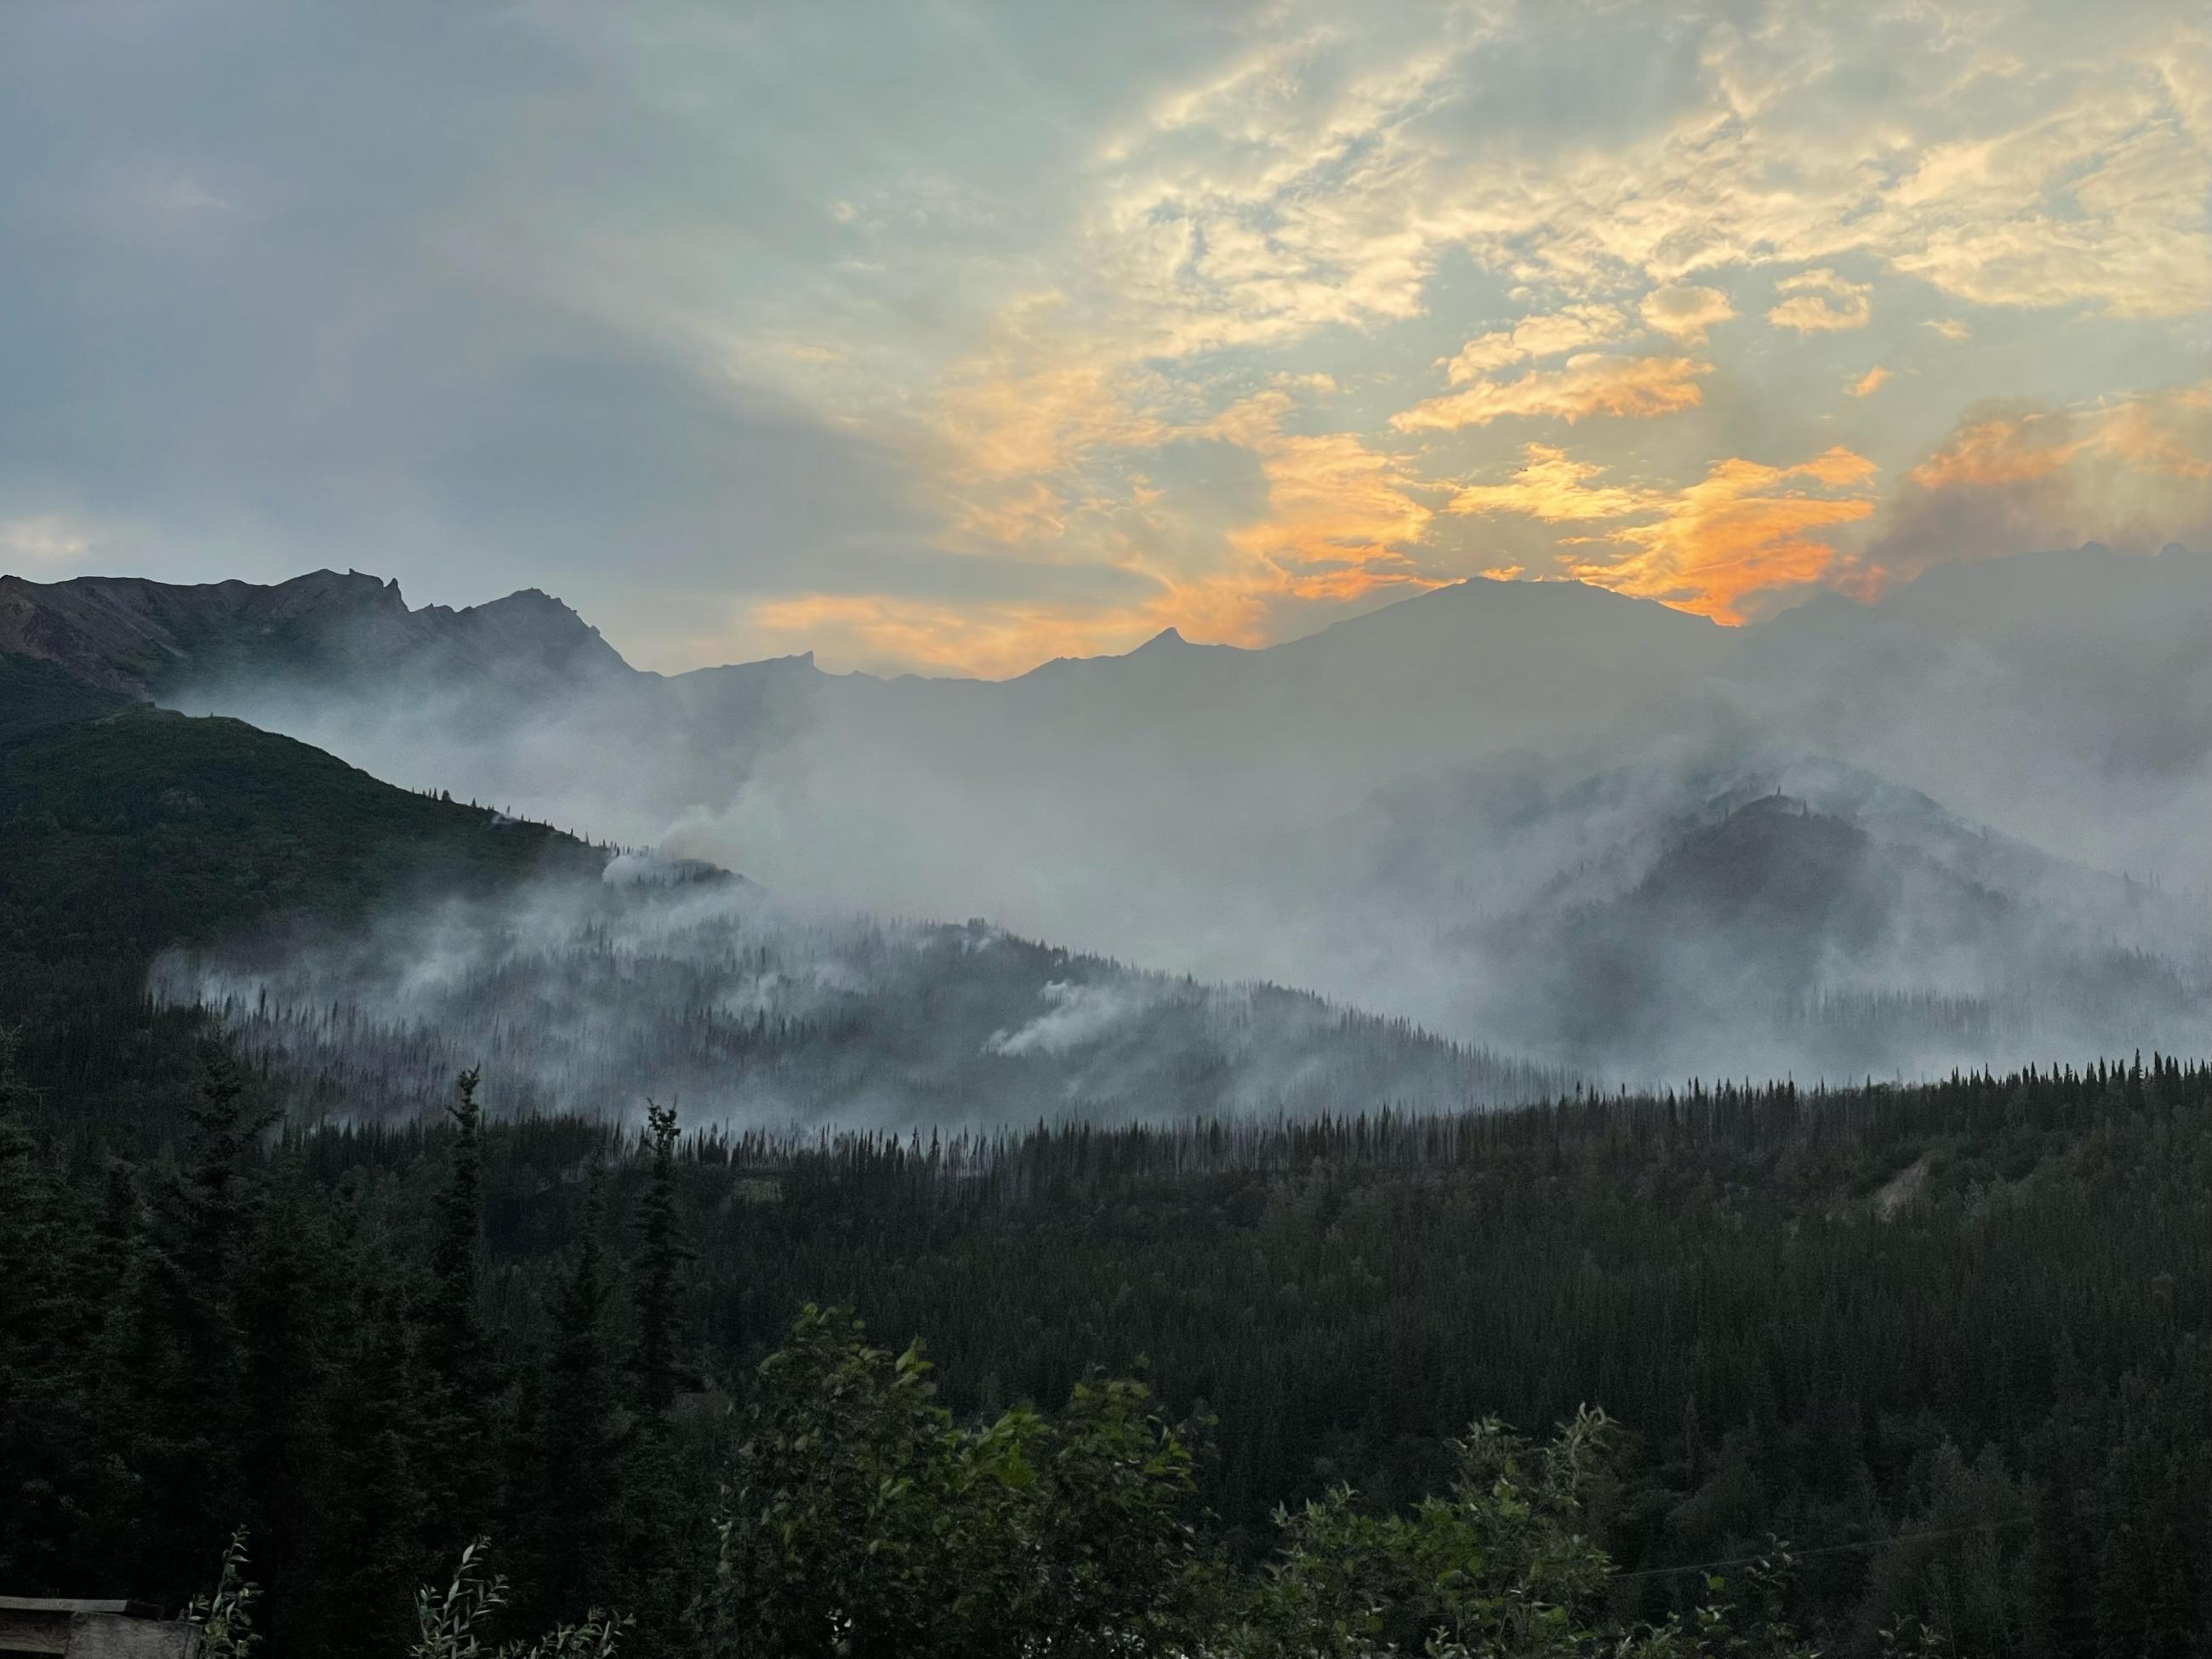 Smoke in the mountains with a nectarine sunset